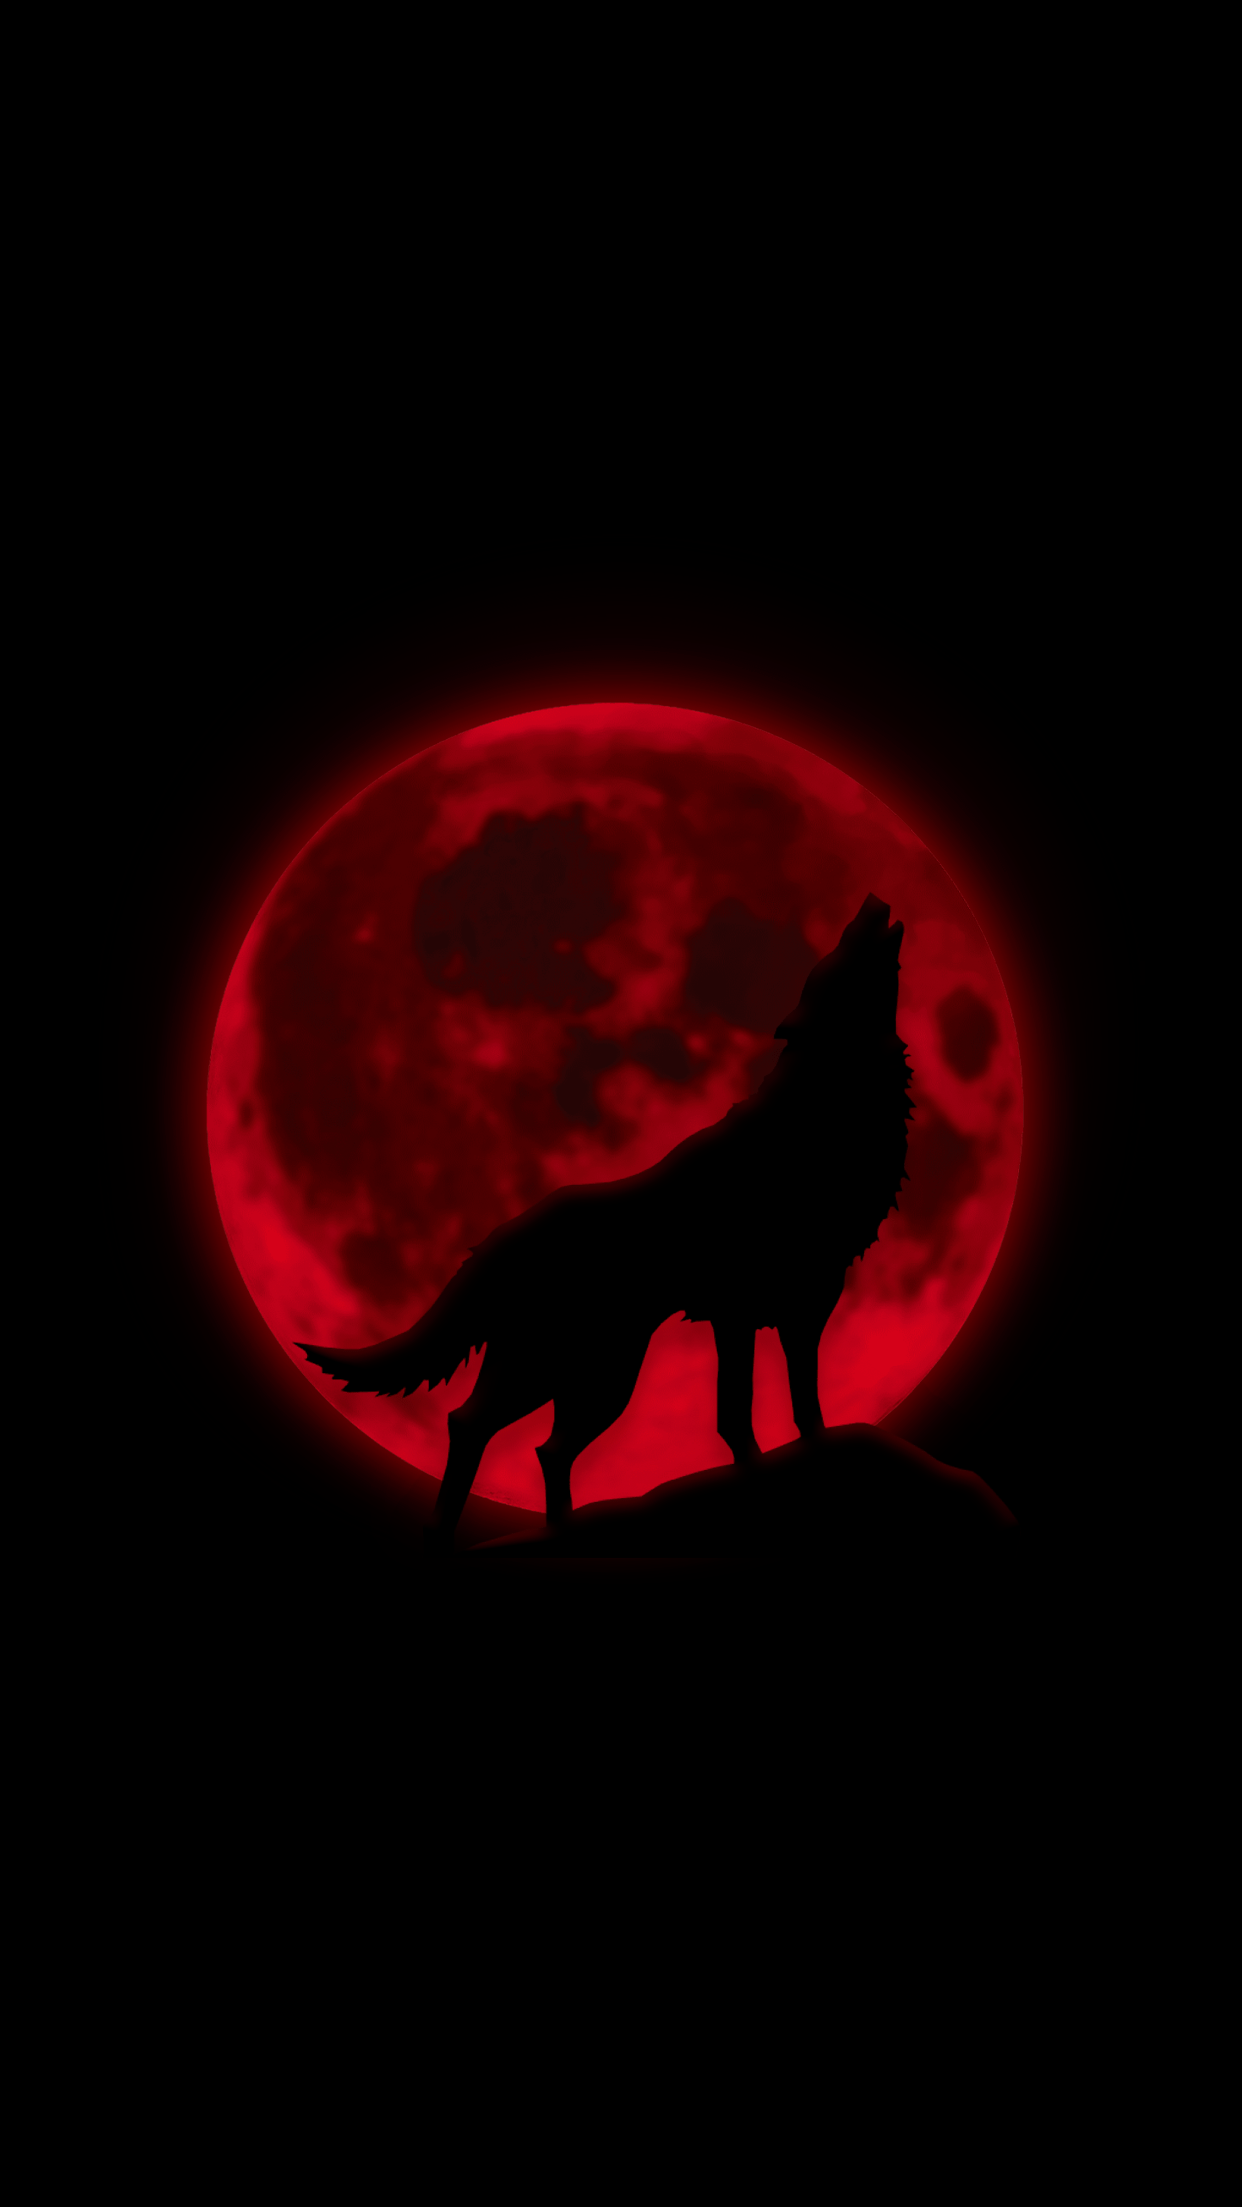 The Wolf Dark Red Wallpaper By Me iPhone Version R Iwallpaper